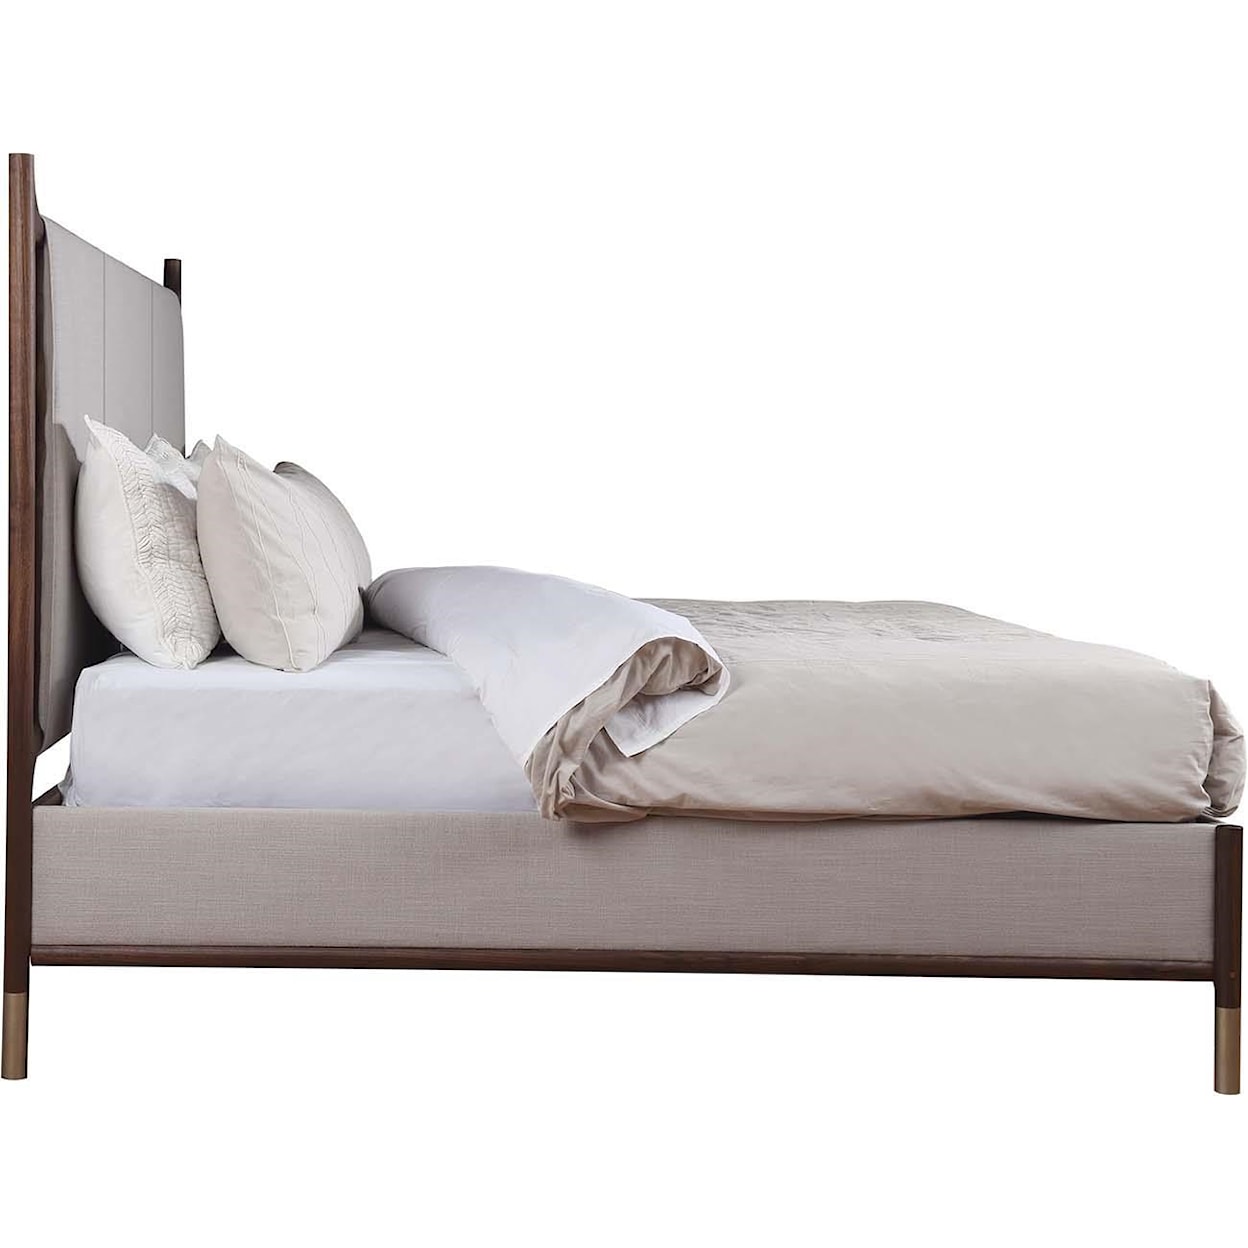 Stickley Walnut Grove King Crypton Fabric Upholstered Bed